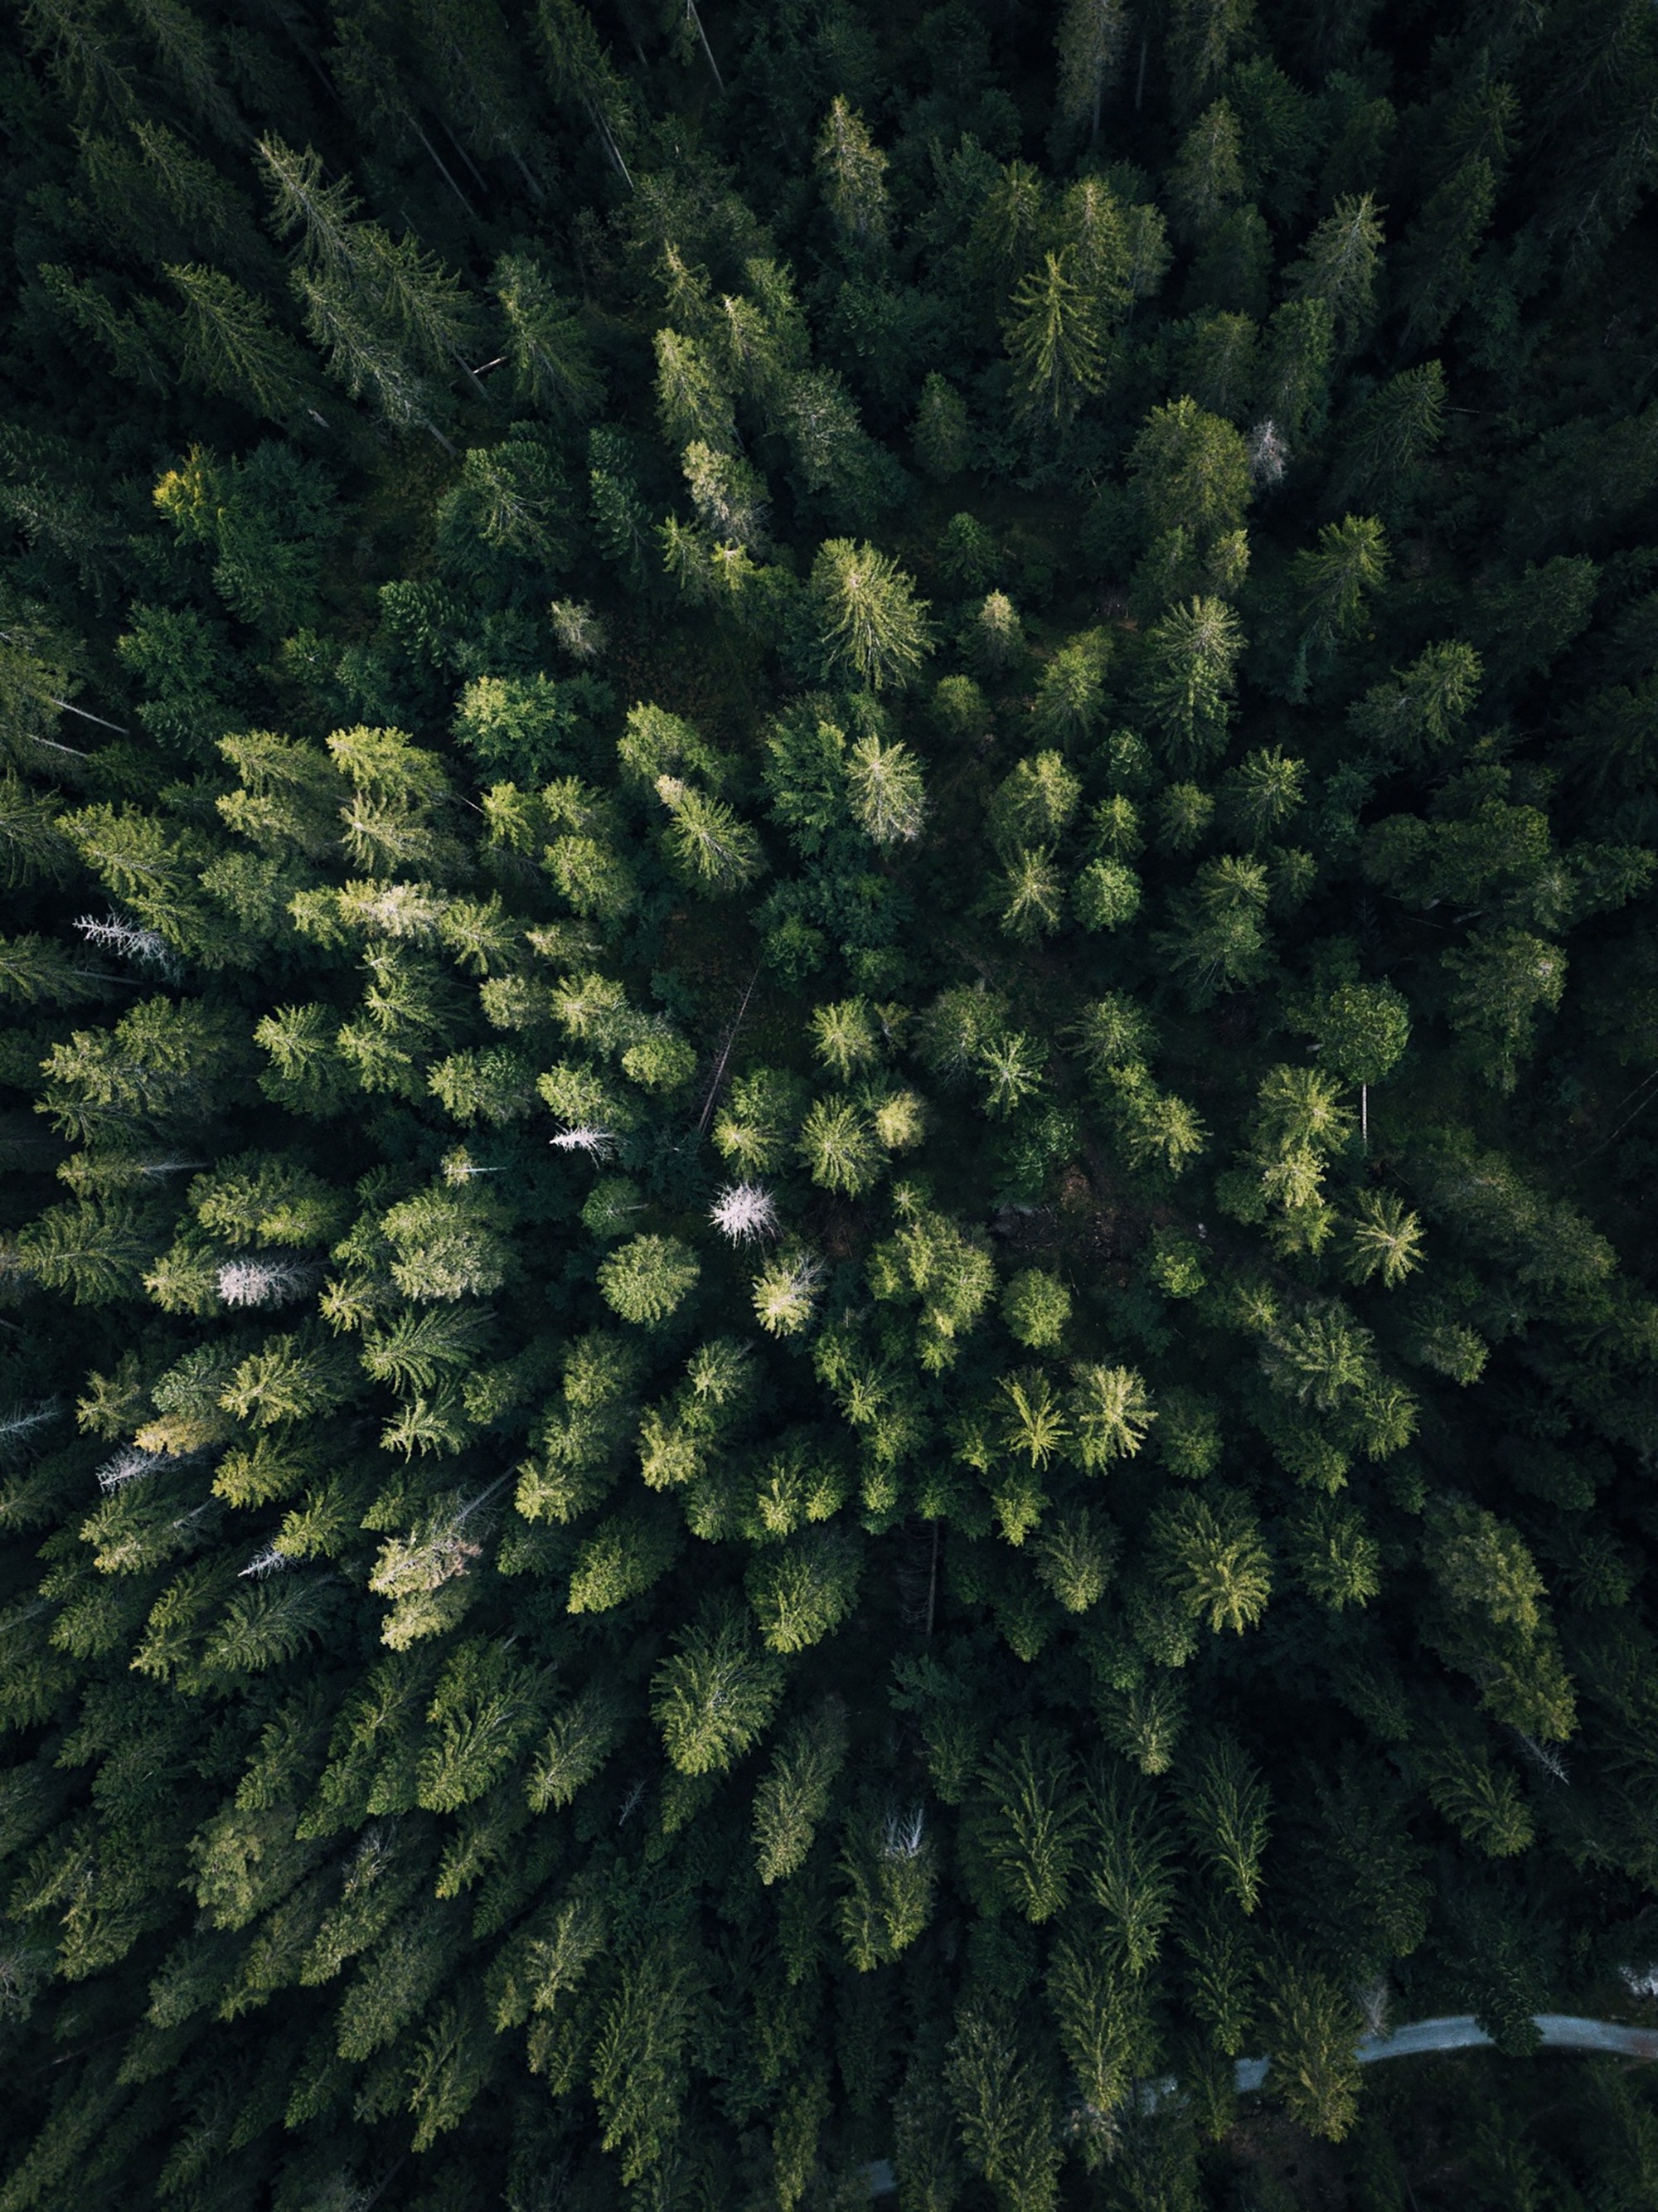 view from above, nature, trees, green, forest, overview, review